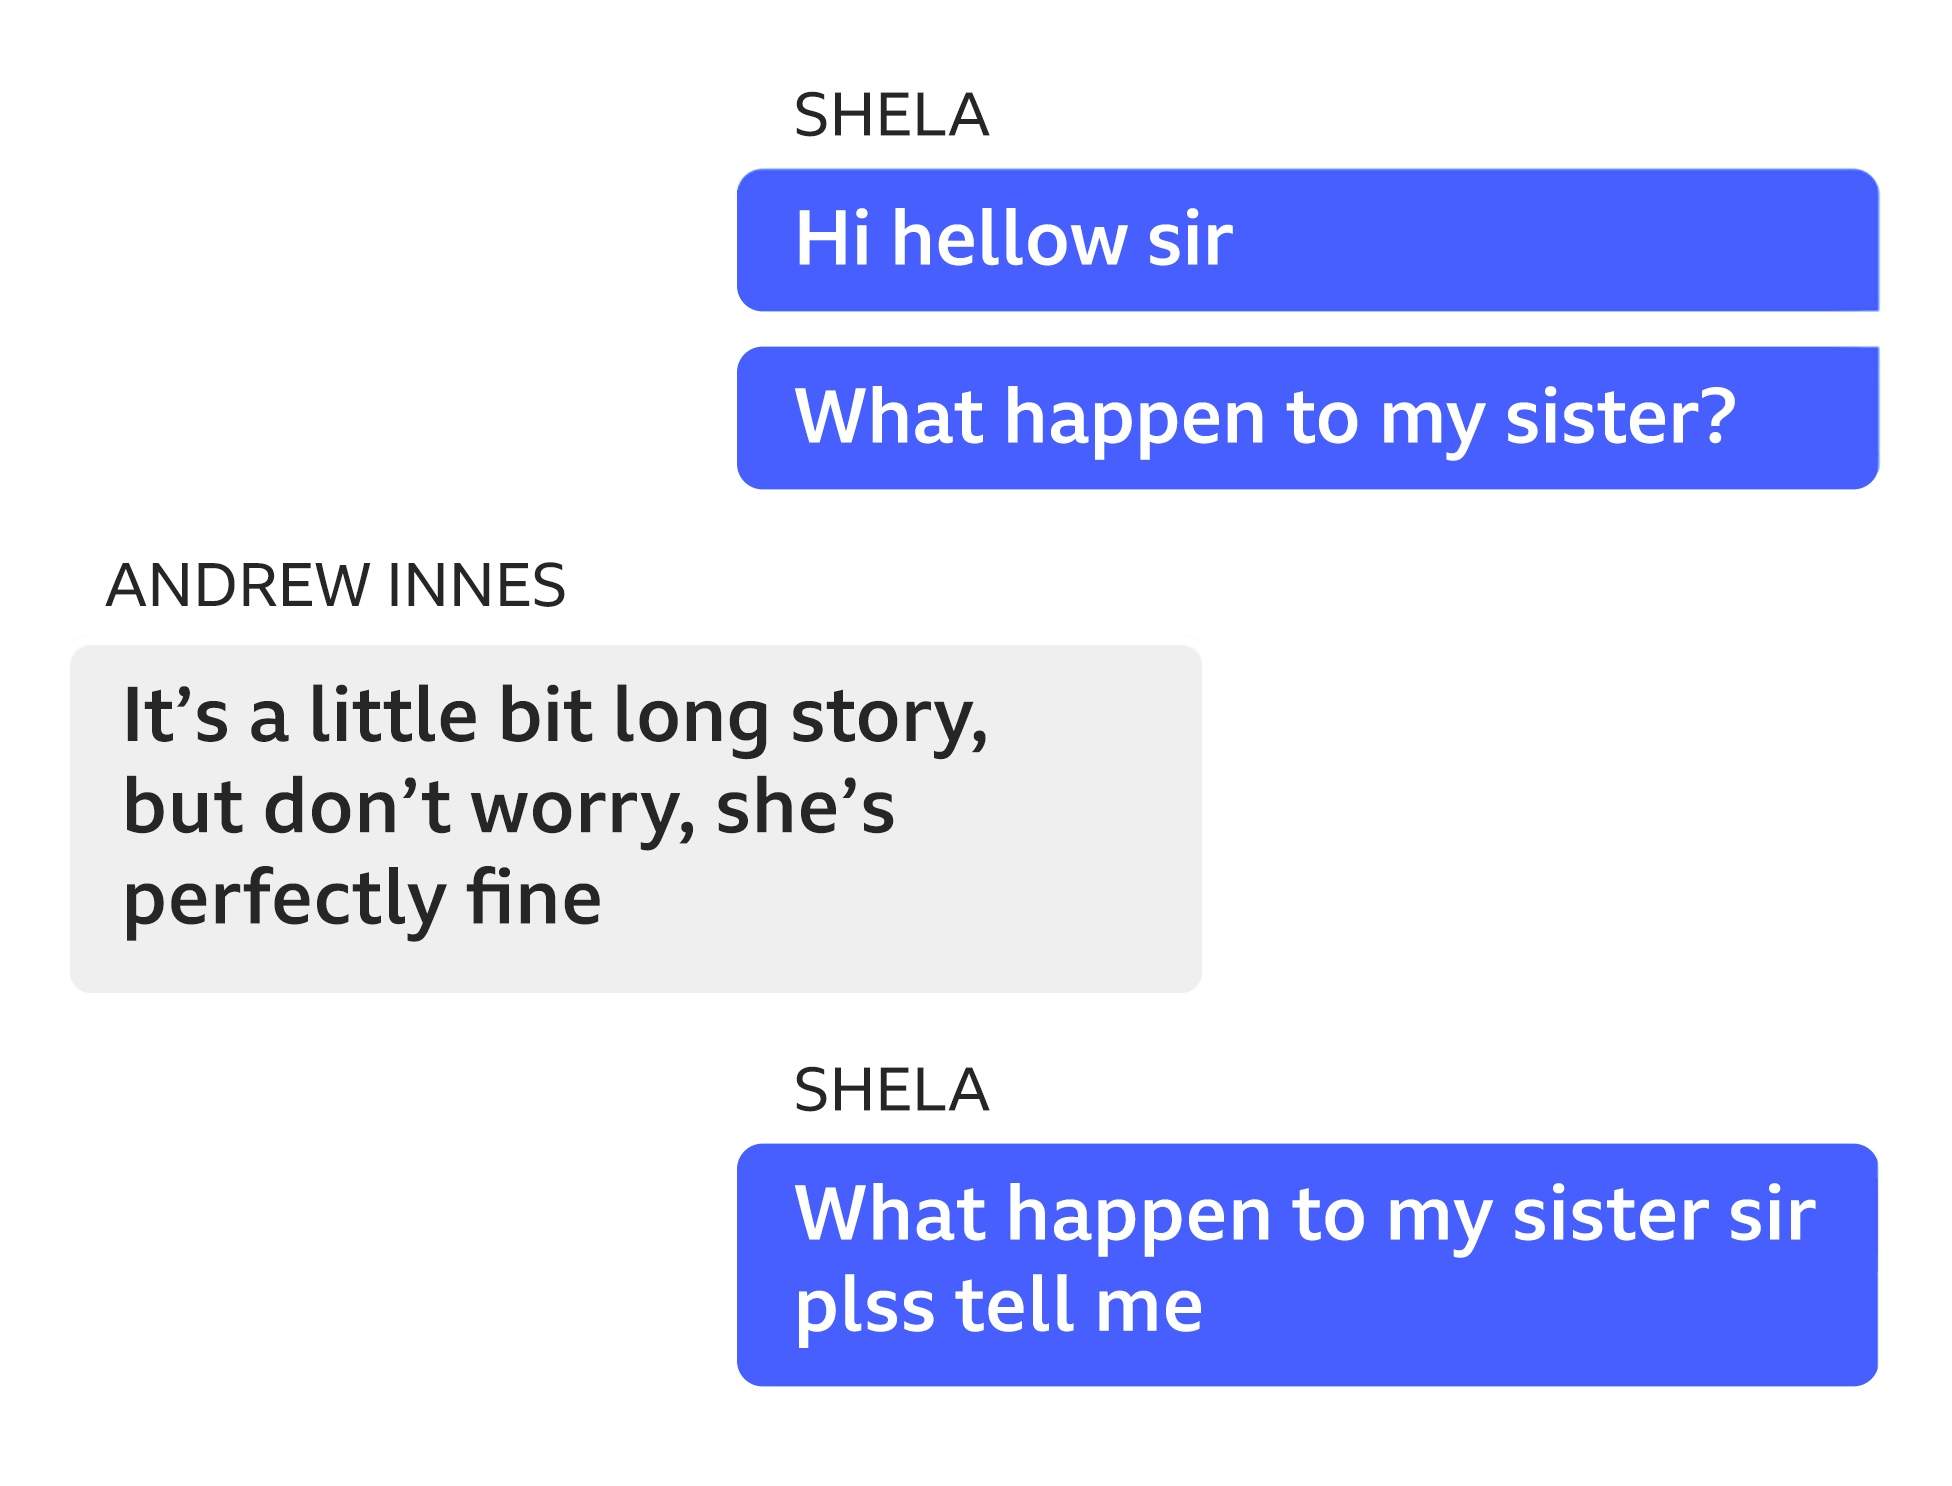 Image showing an exchange of messages between Shela and Andrew Innes on Facebook Messenger. Shela: Sir can you tell me my sister is alive? Andrew Innes: Scotland is a very peaceful country, we don’t have much crime at all. Please try not to worry, I’m sure your sister is perfectly safe.